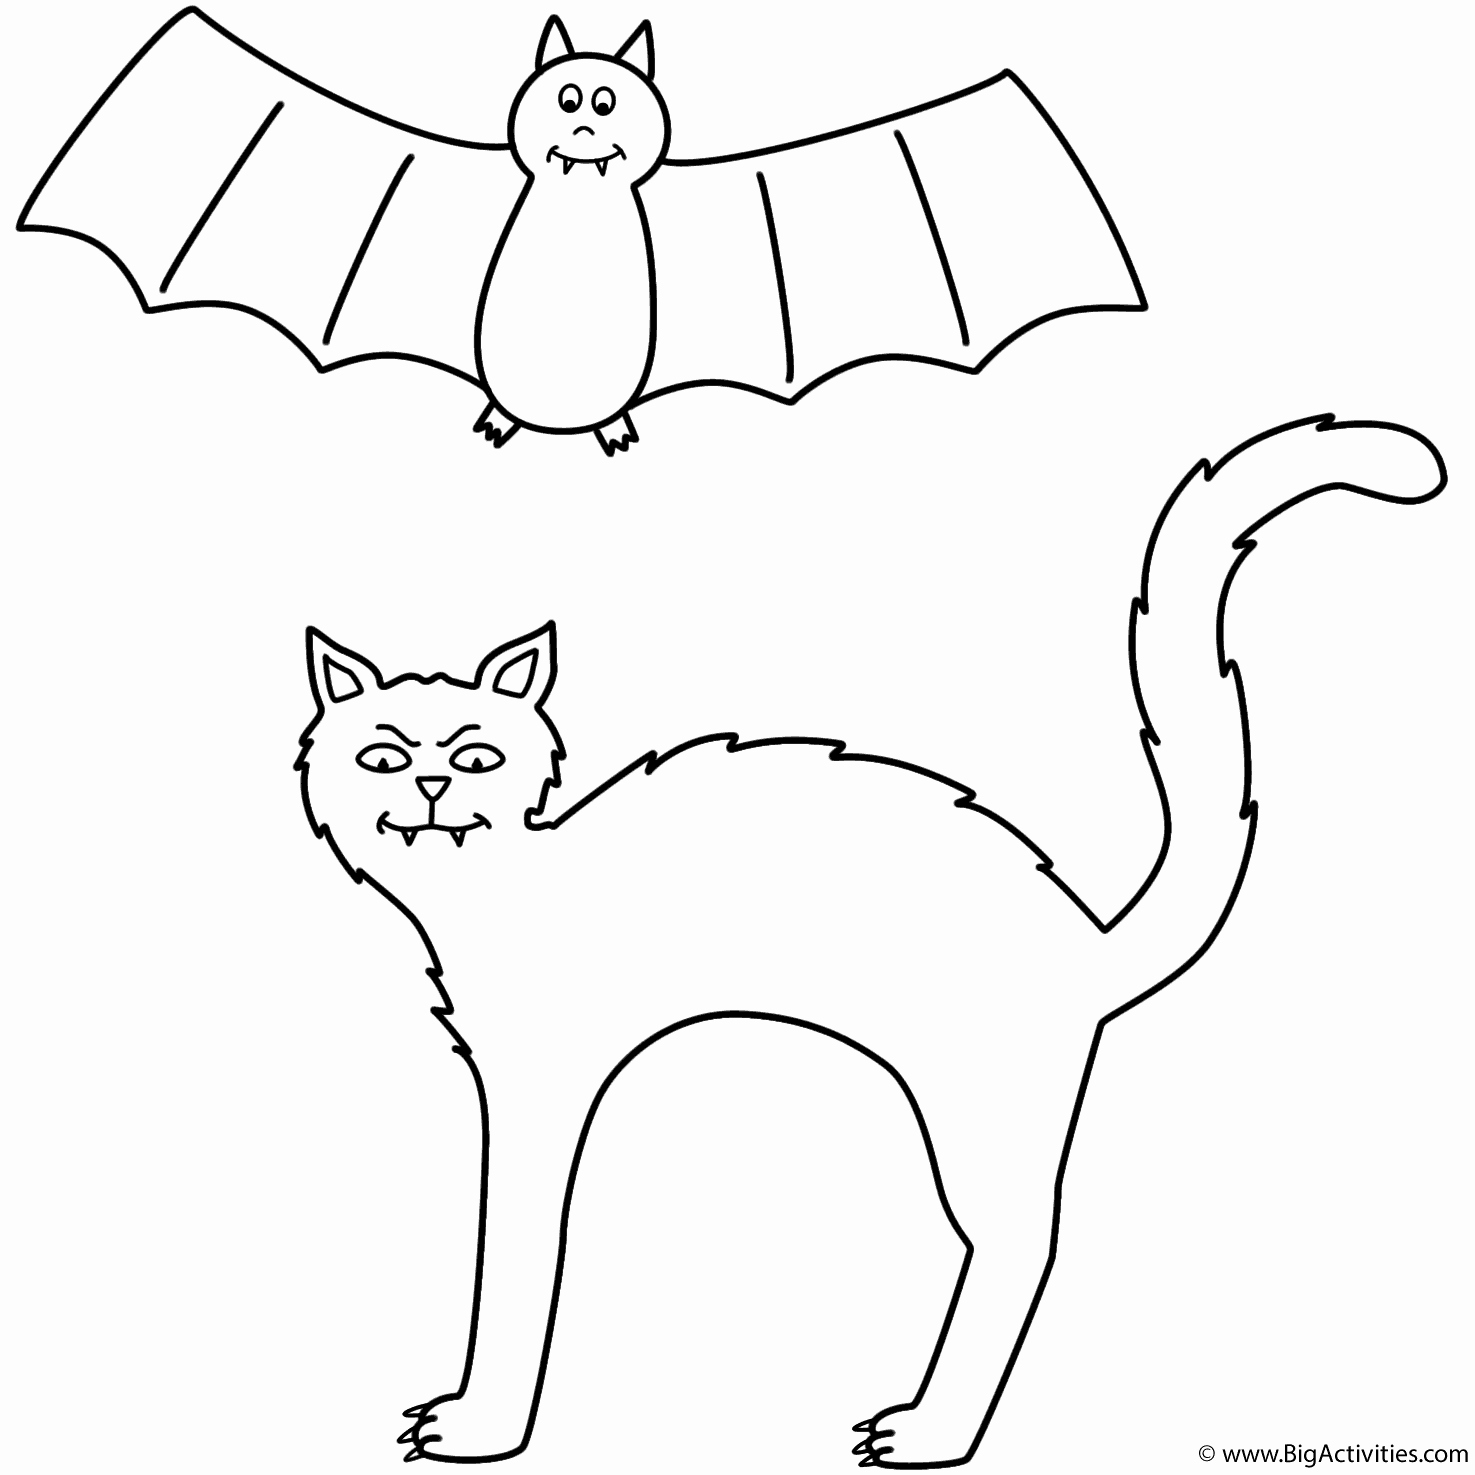 995 Cute Splat The Cat Coloring Pages with Printable